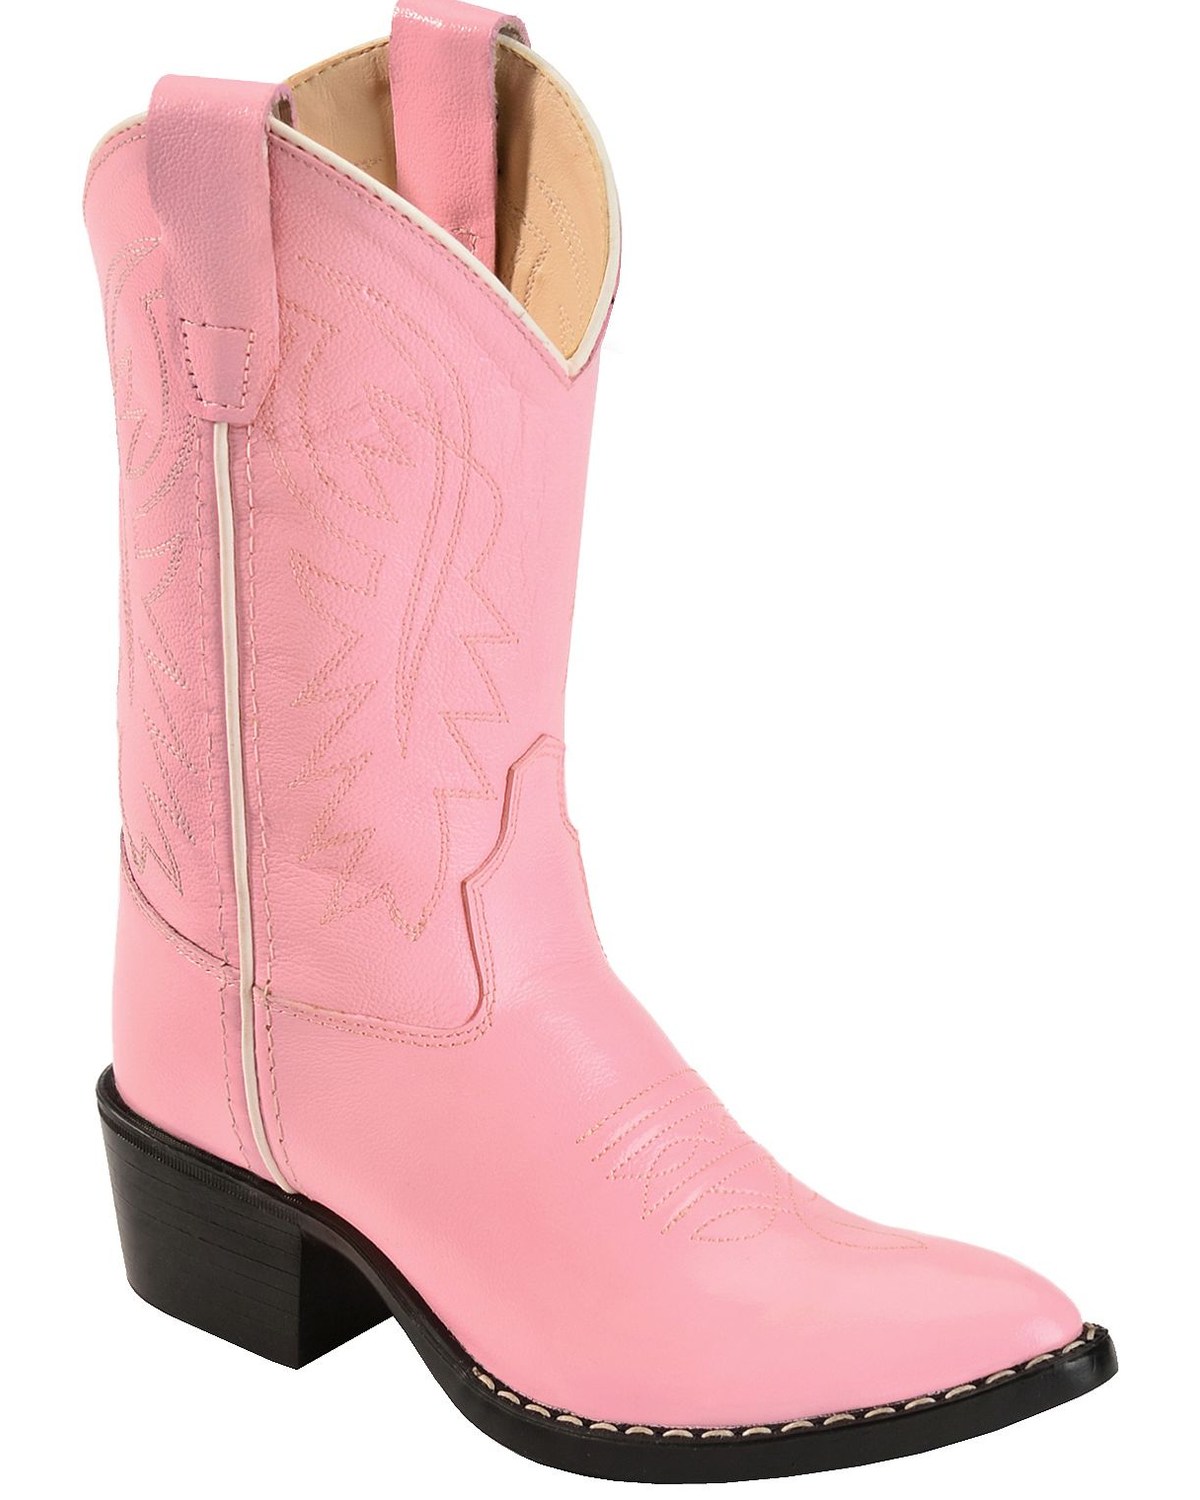 Old West Girls' Pink Cowgirl Boots 